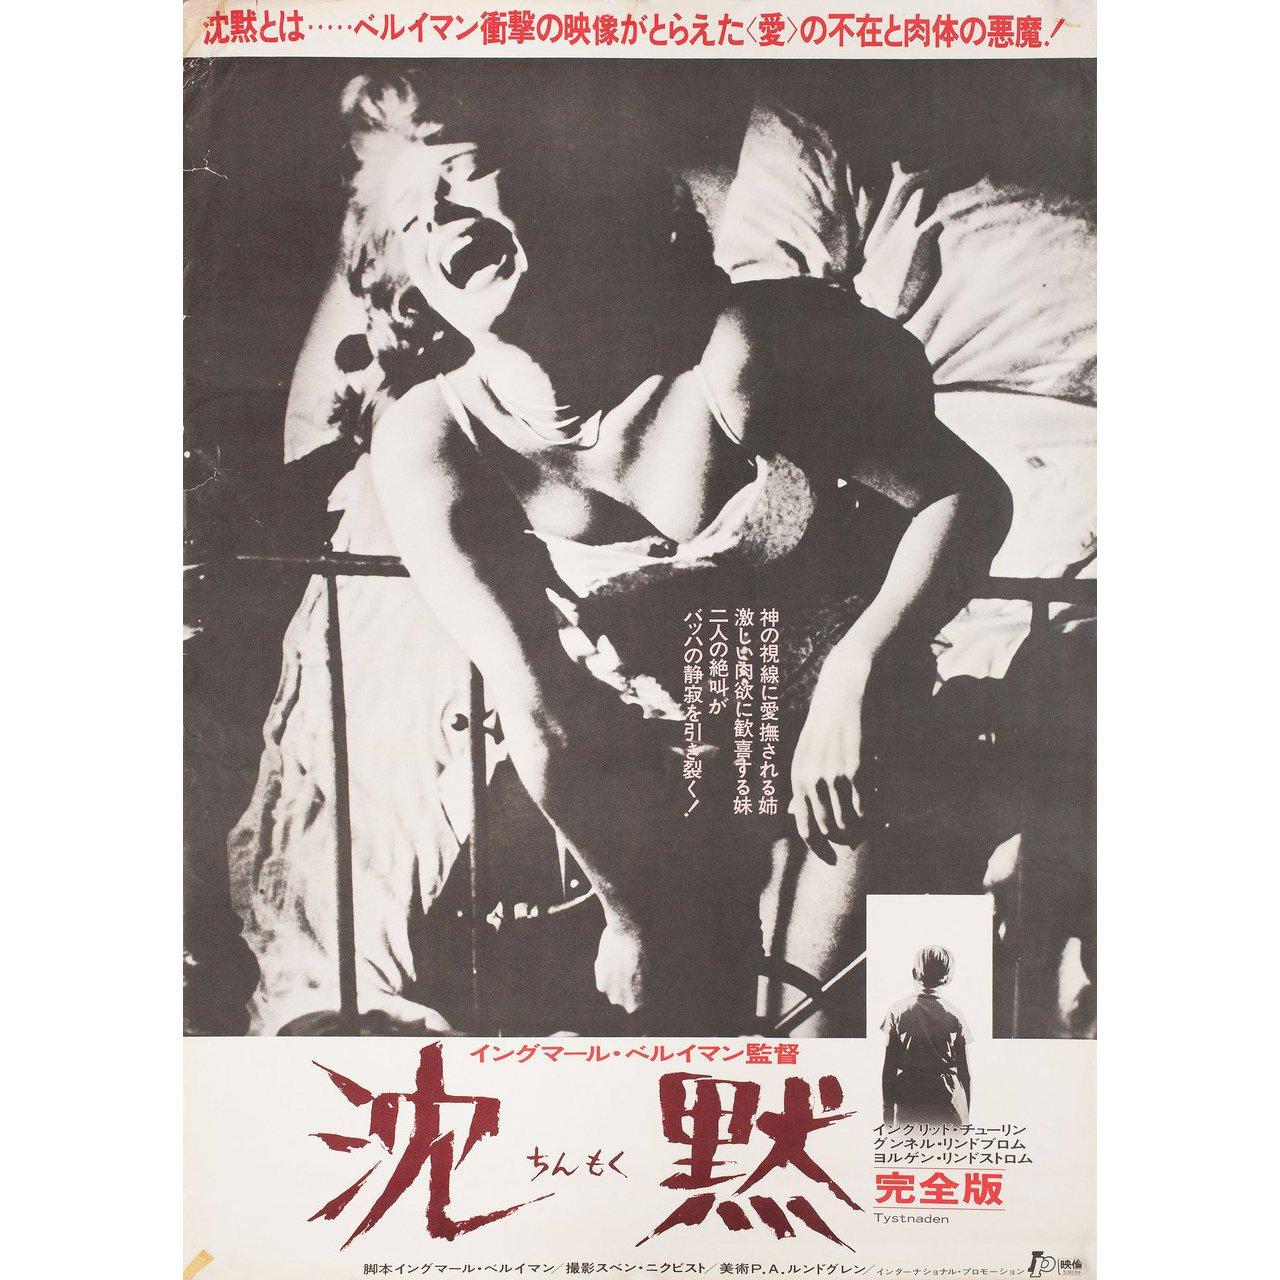 Original 1978 re-release Japanese B2 poster for the 1963 film The Silence (Tystnaden) directed by Ingmar Bergman with Ingrid Thulin / Gunnel Lindblom / Birger Malmsten / Hakan Jahnberg. Good-very good condition, rolled with edge tears. Please note: